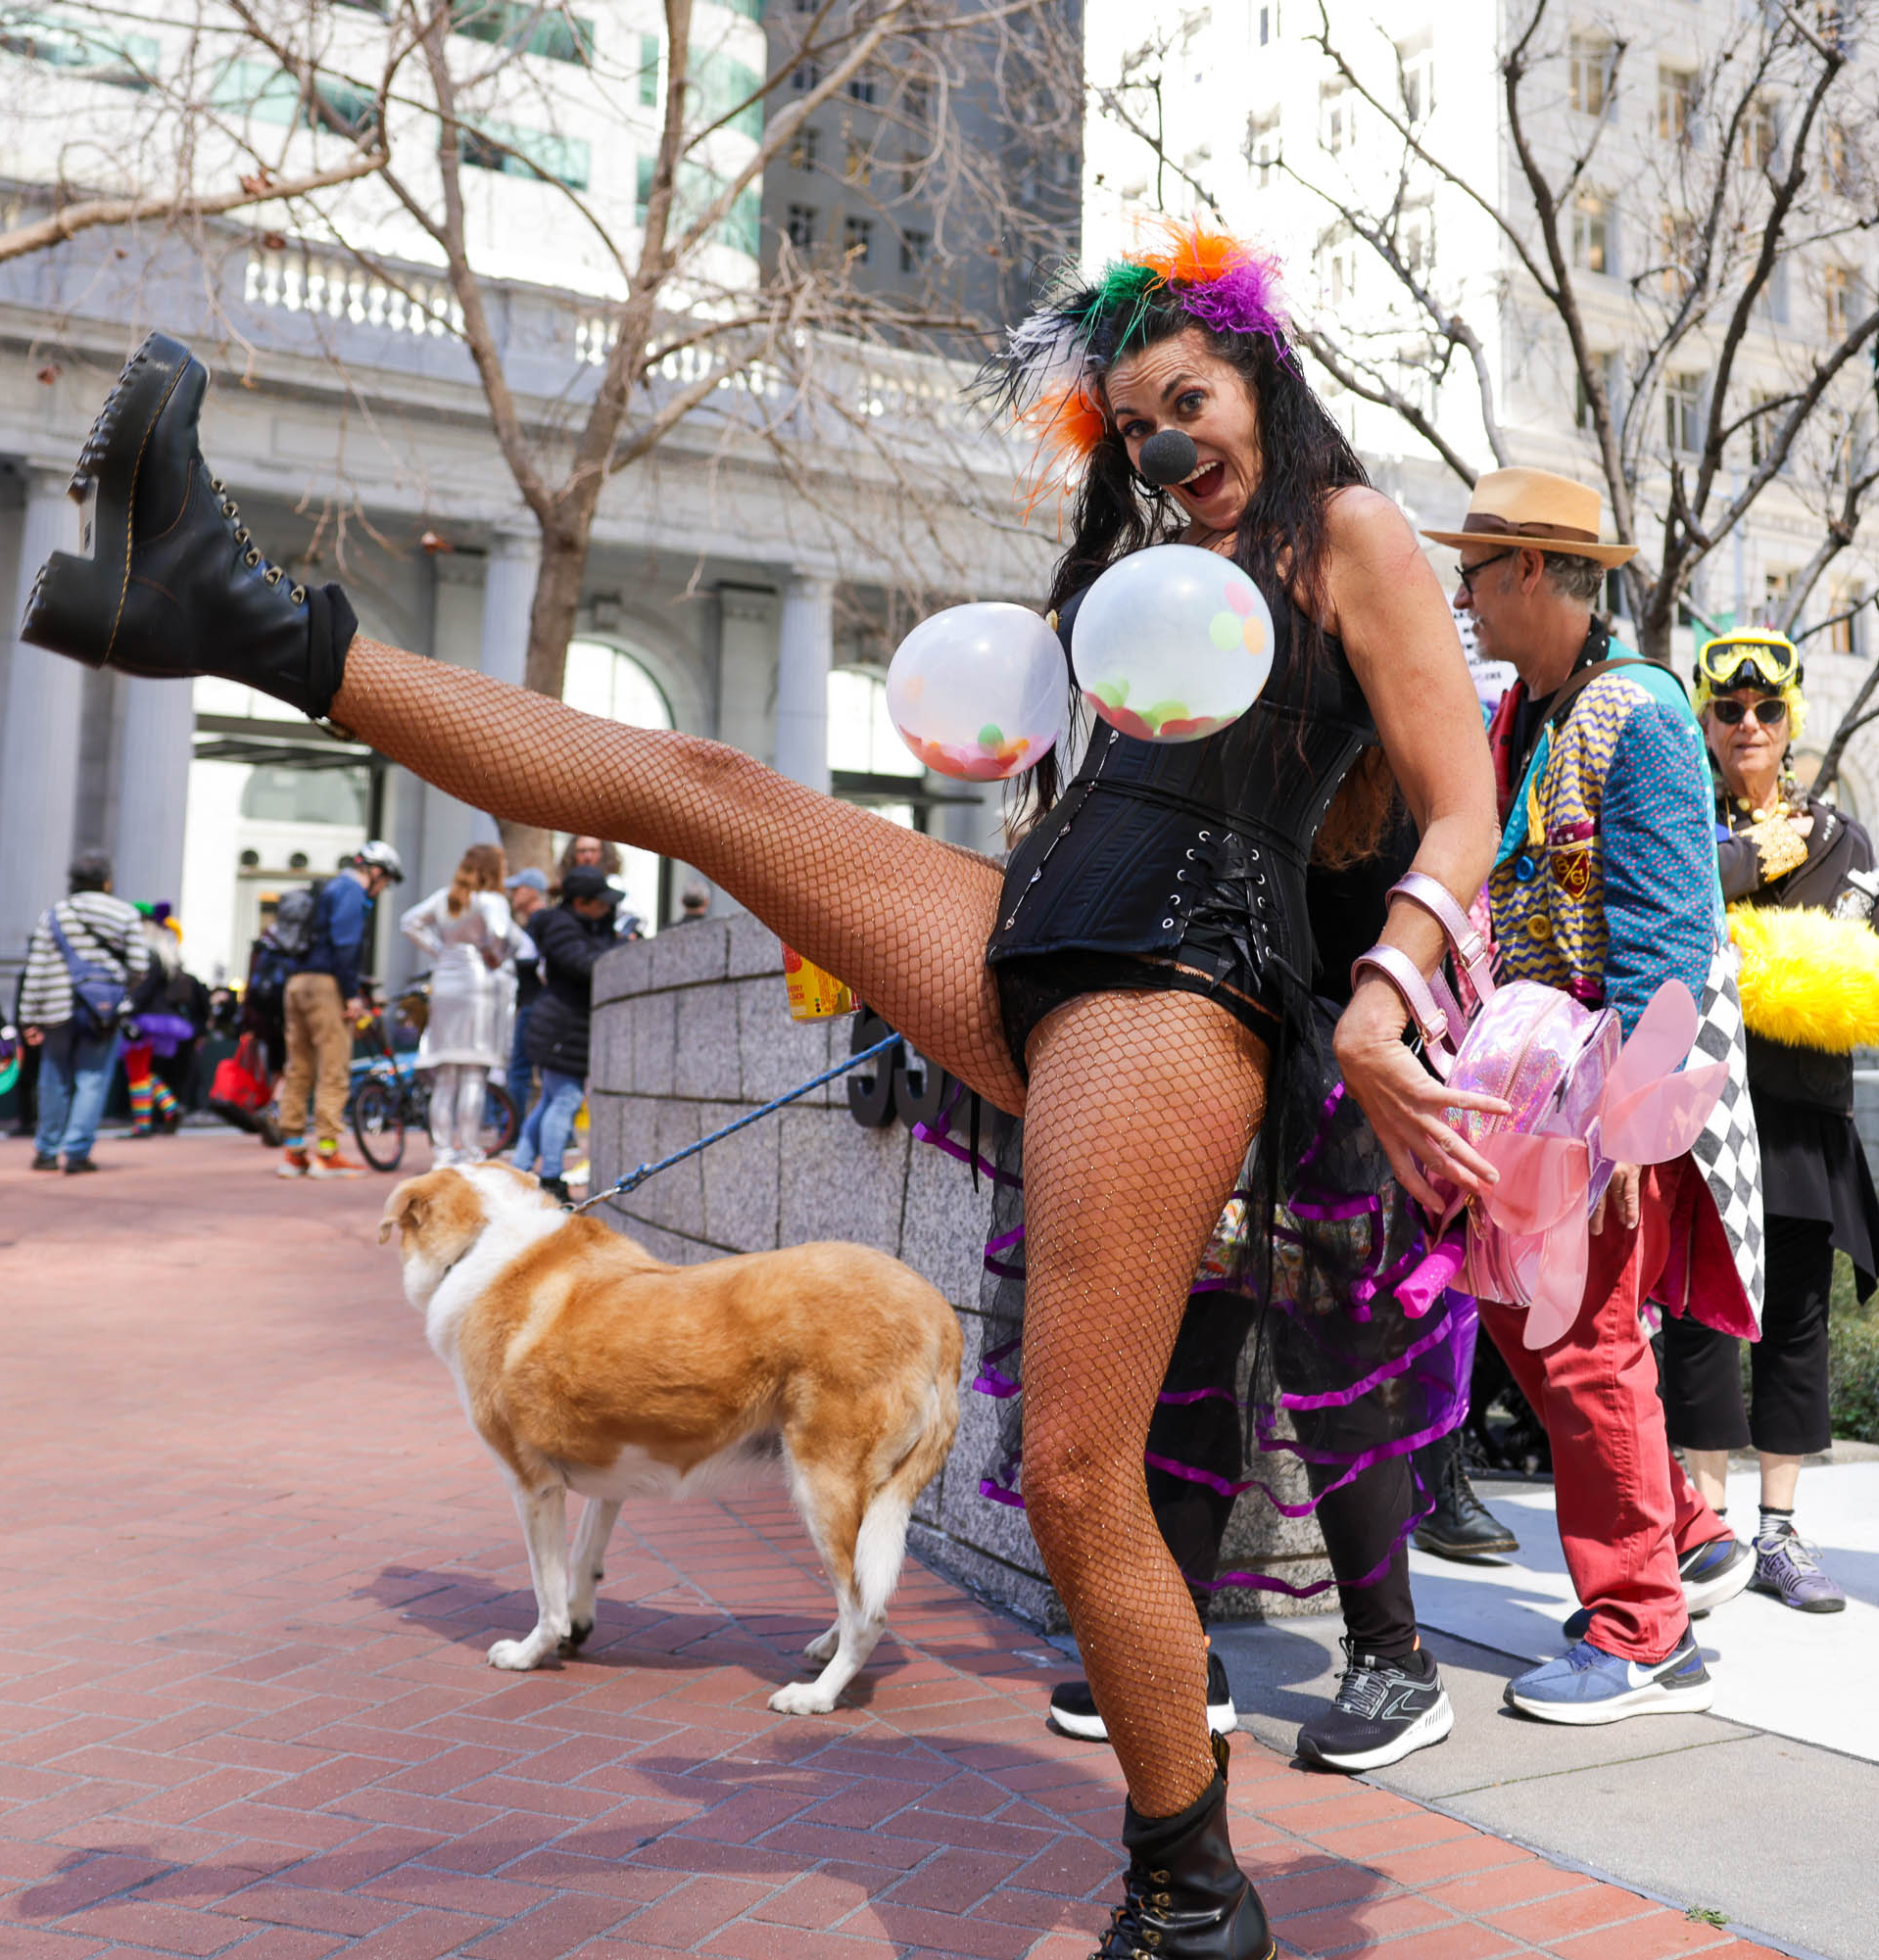 A person in colorful costume and makeup raises a leg high, fishnets visible, with a dog and people in festive wear behind.